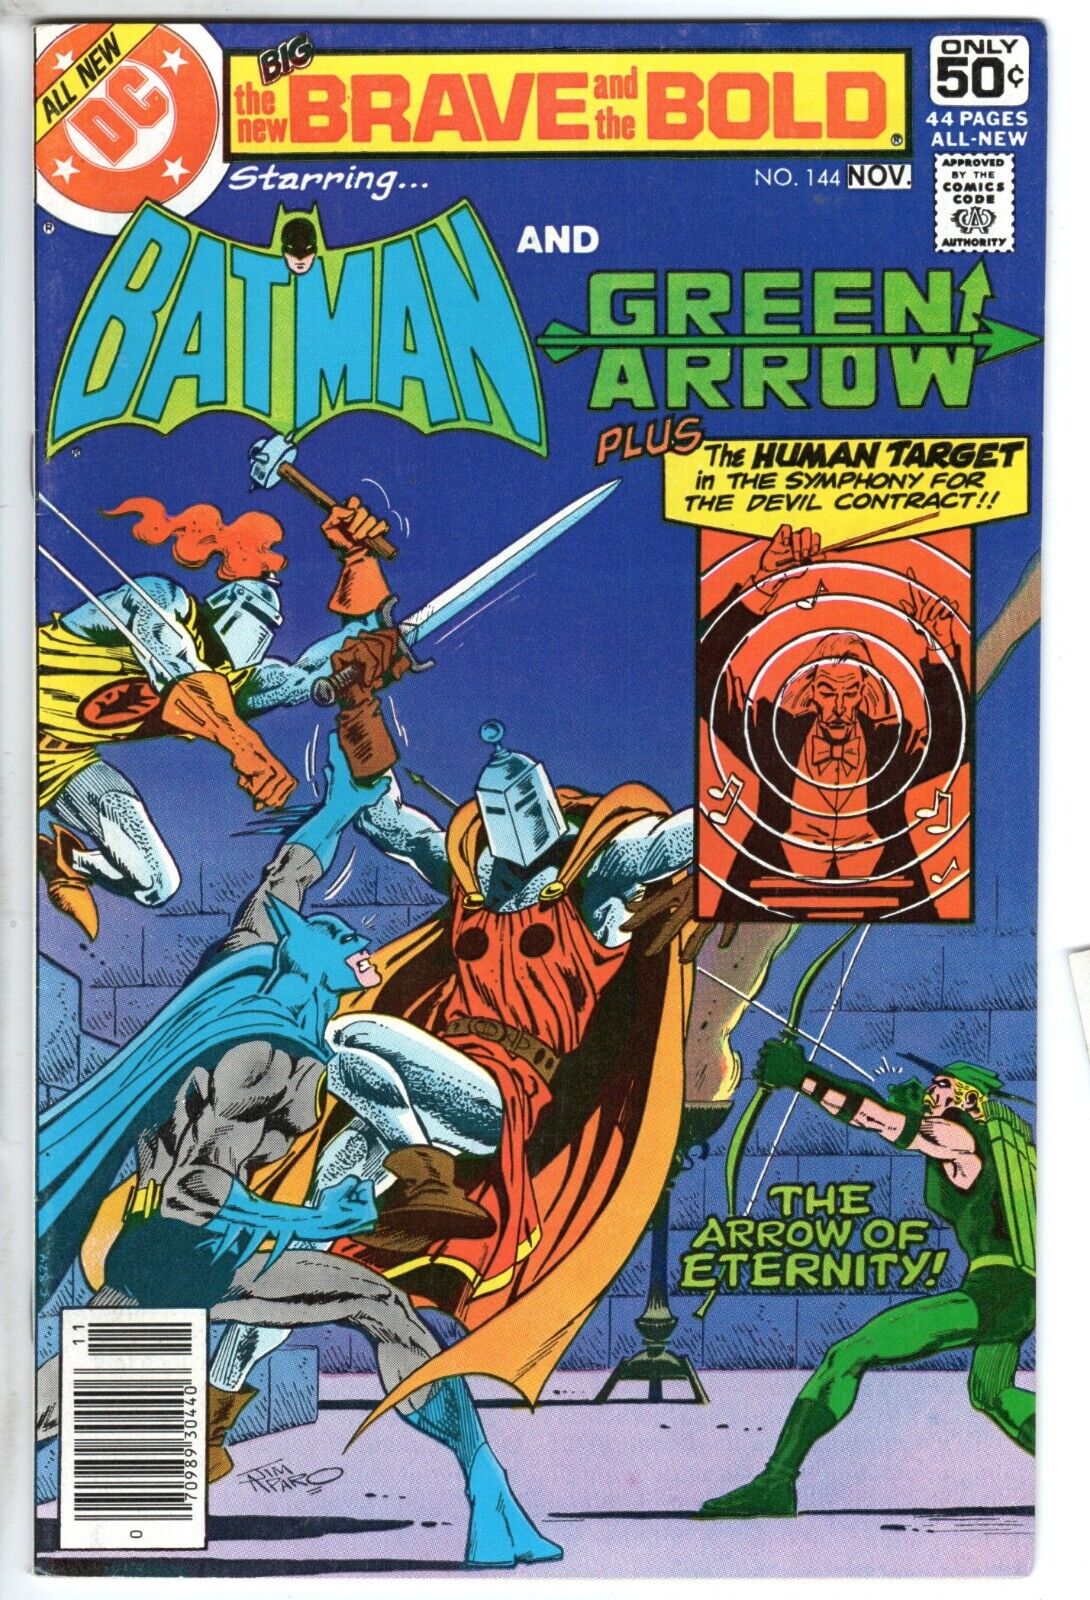 Brave and Bold #144 featuring Batman & Green Arrow, Near Mint Minus Condition